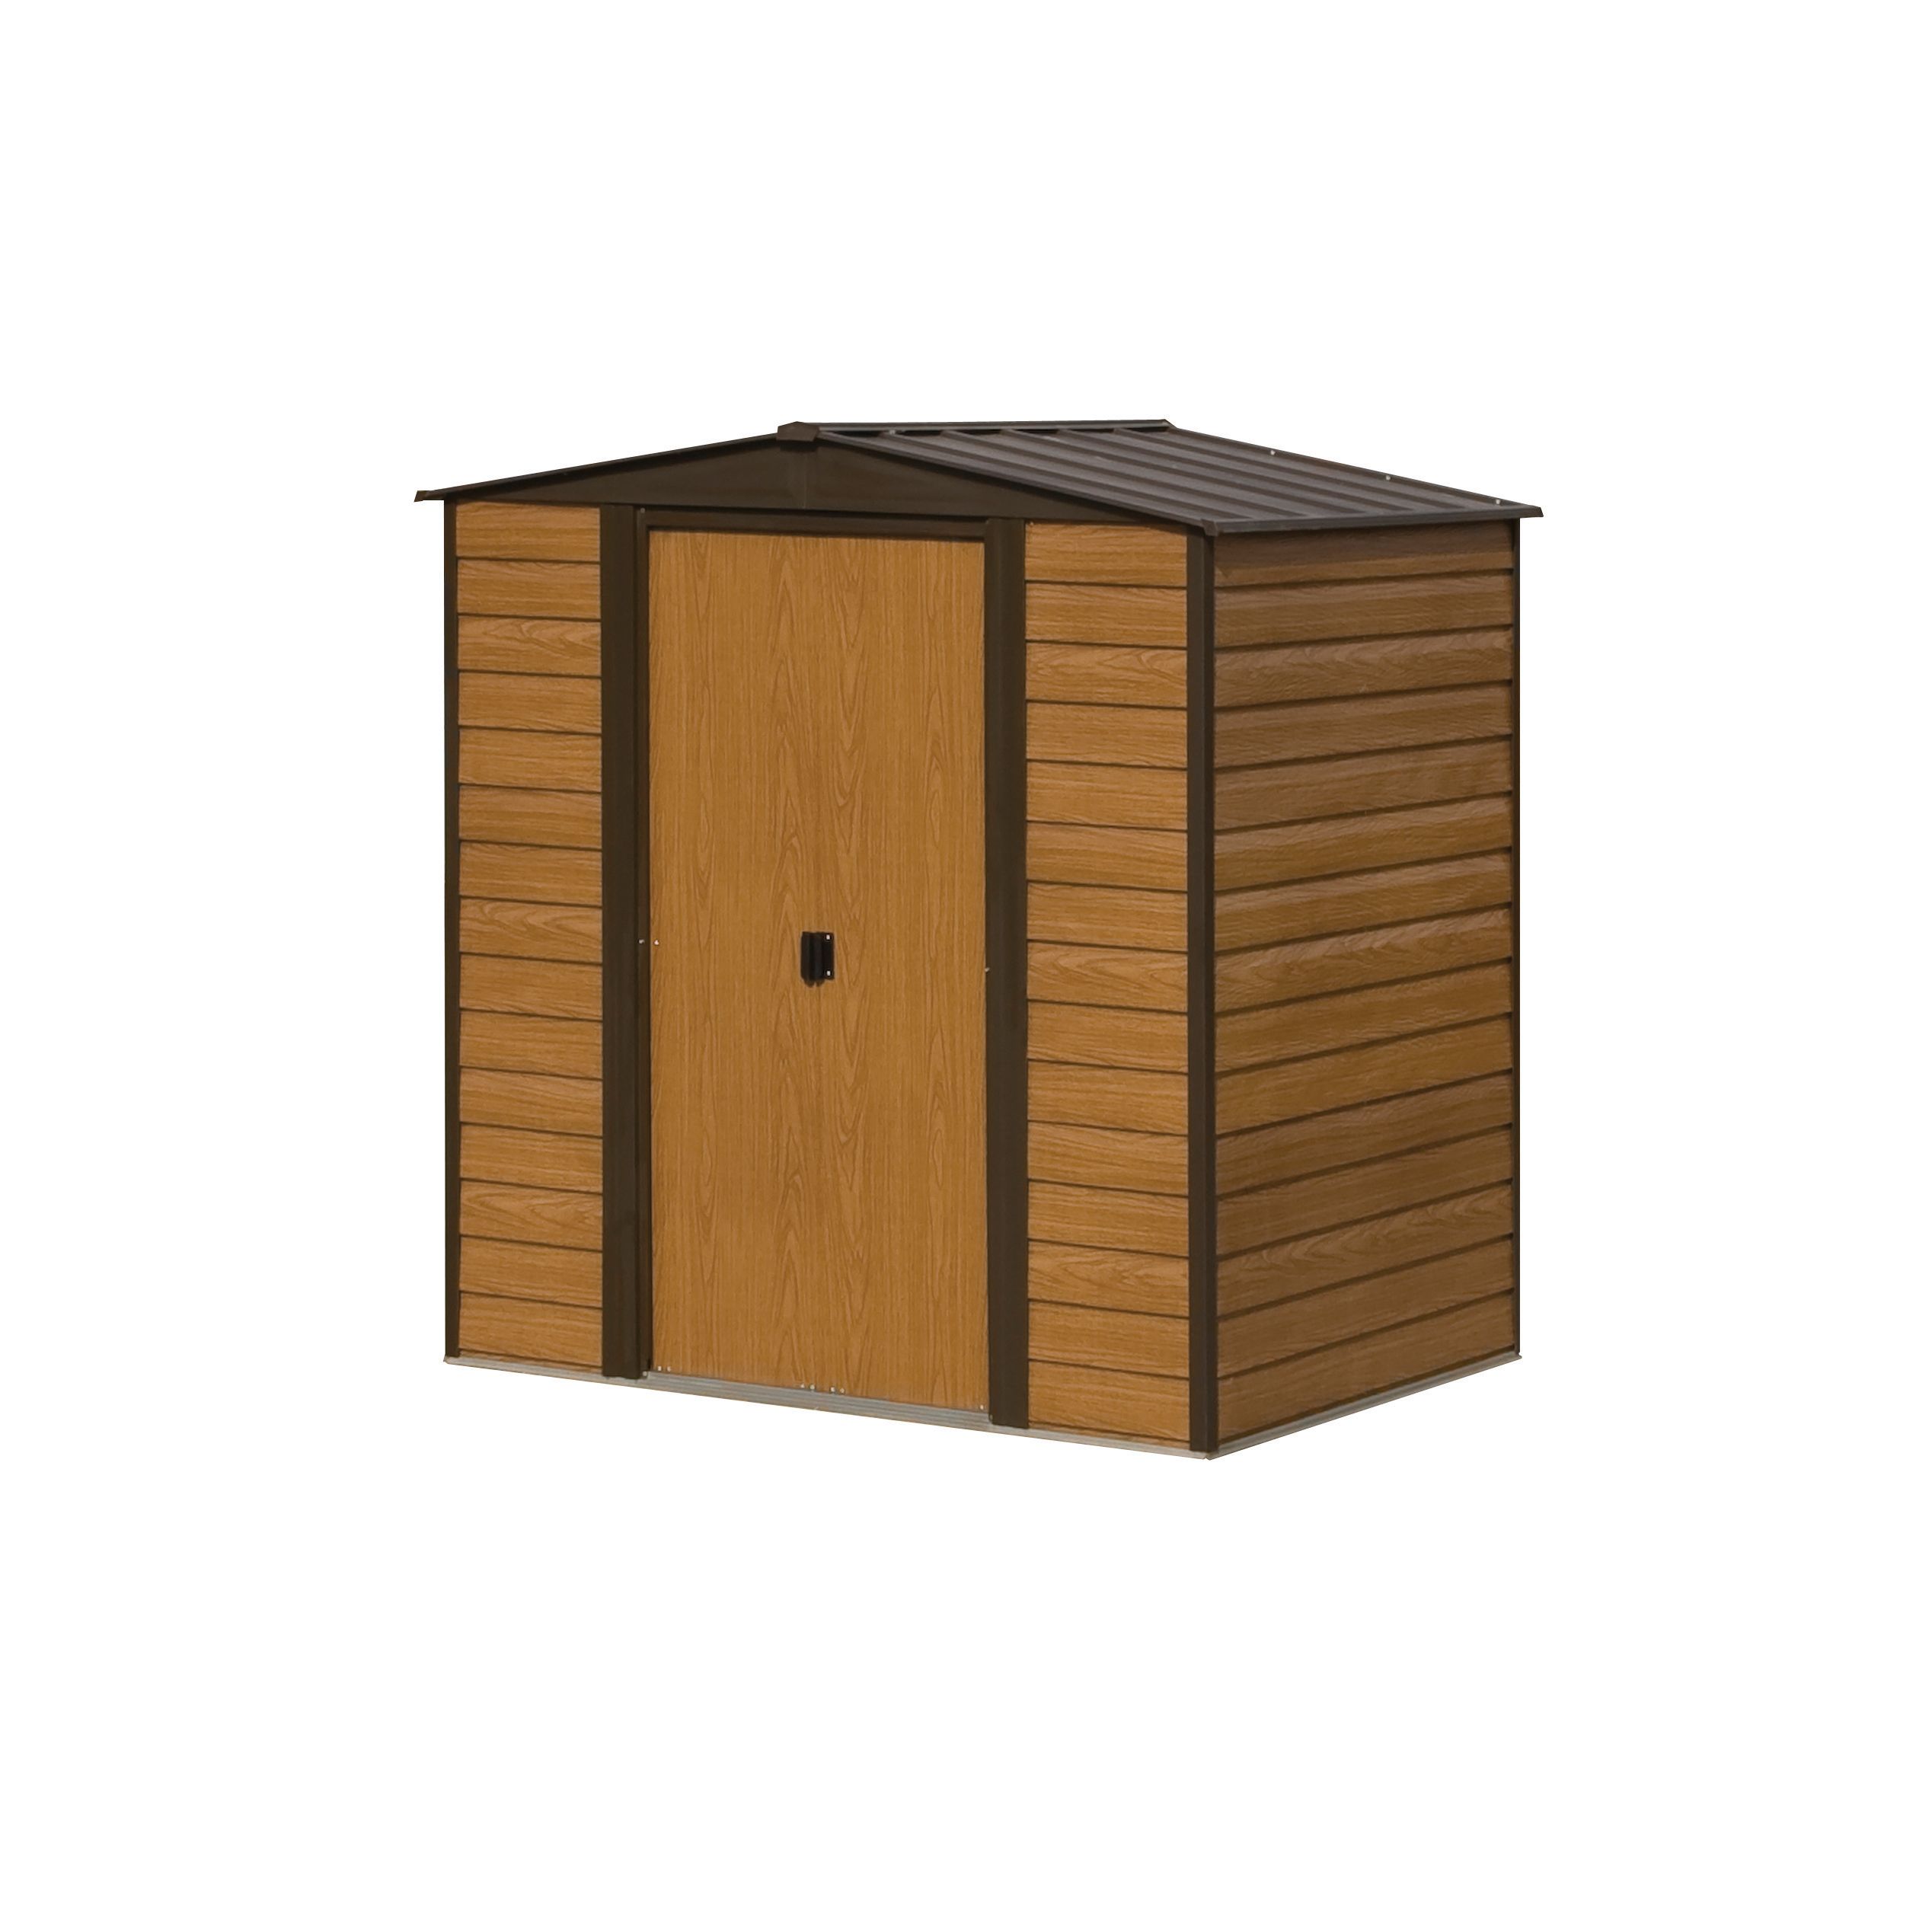 Image of Rowlinson Woodvale 6 x 5ft Double Door Metal Apex Shed without Floor